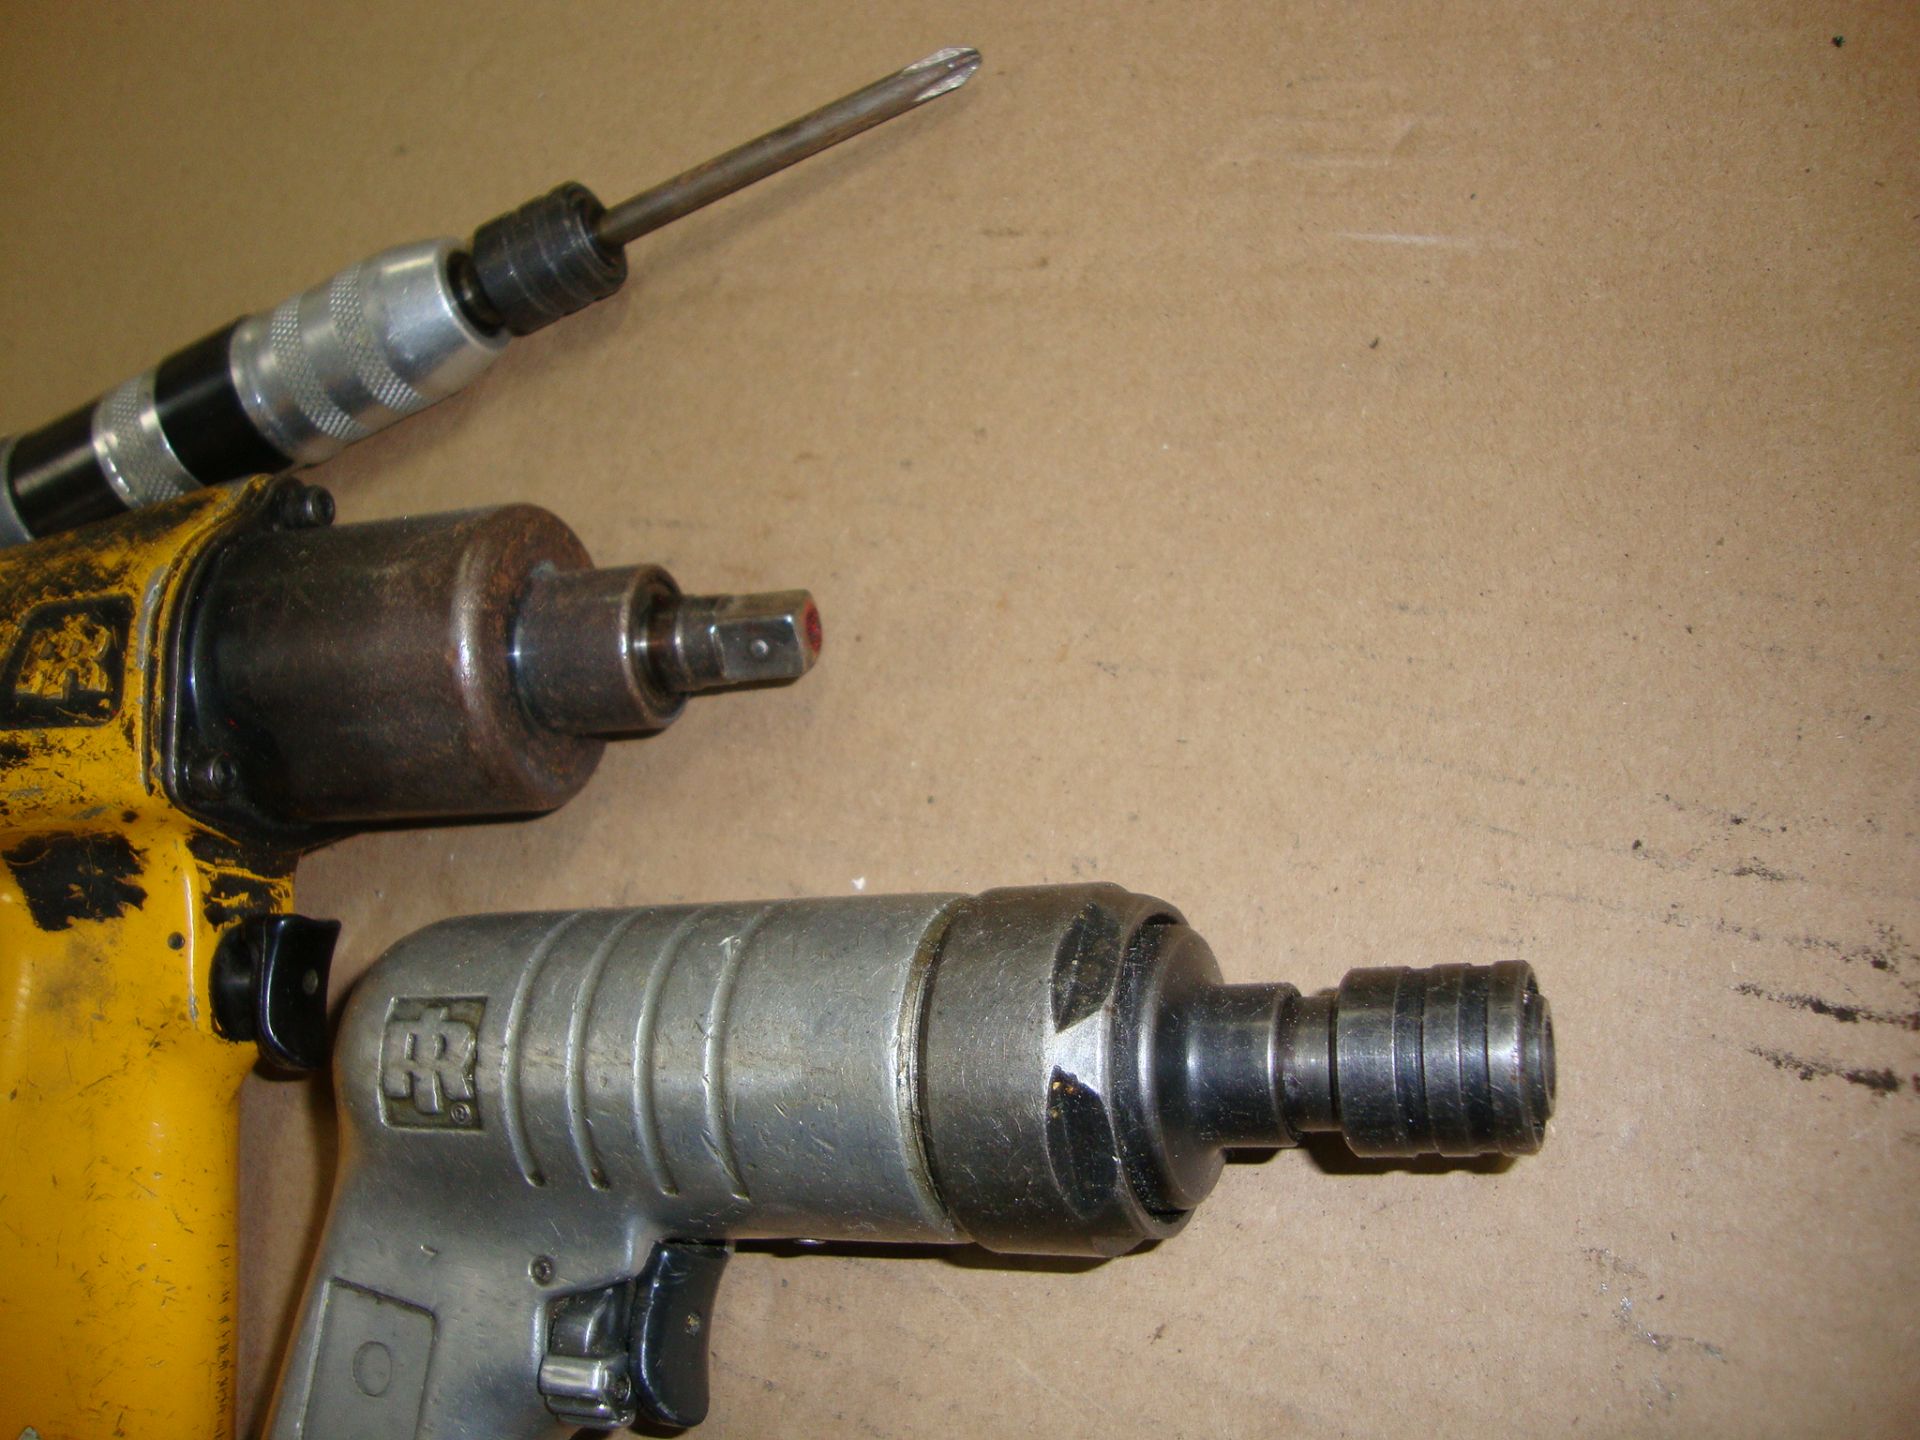 Lot of 4 Pneumatic Drills and Drivers - Image 2 of 2